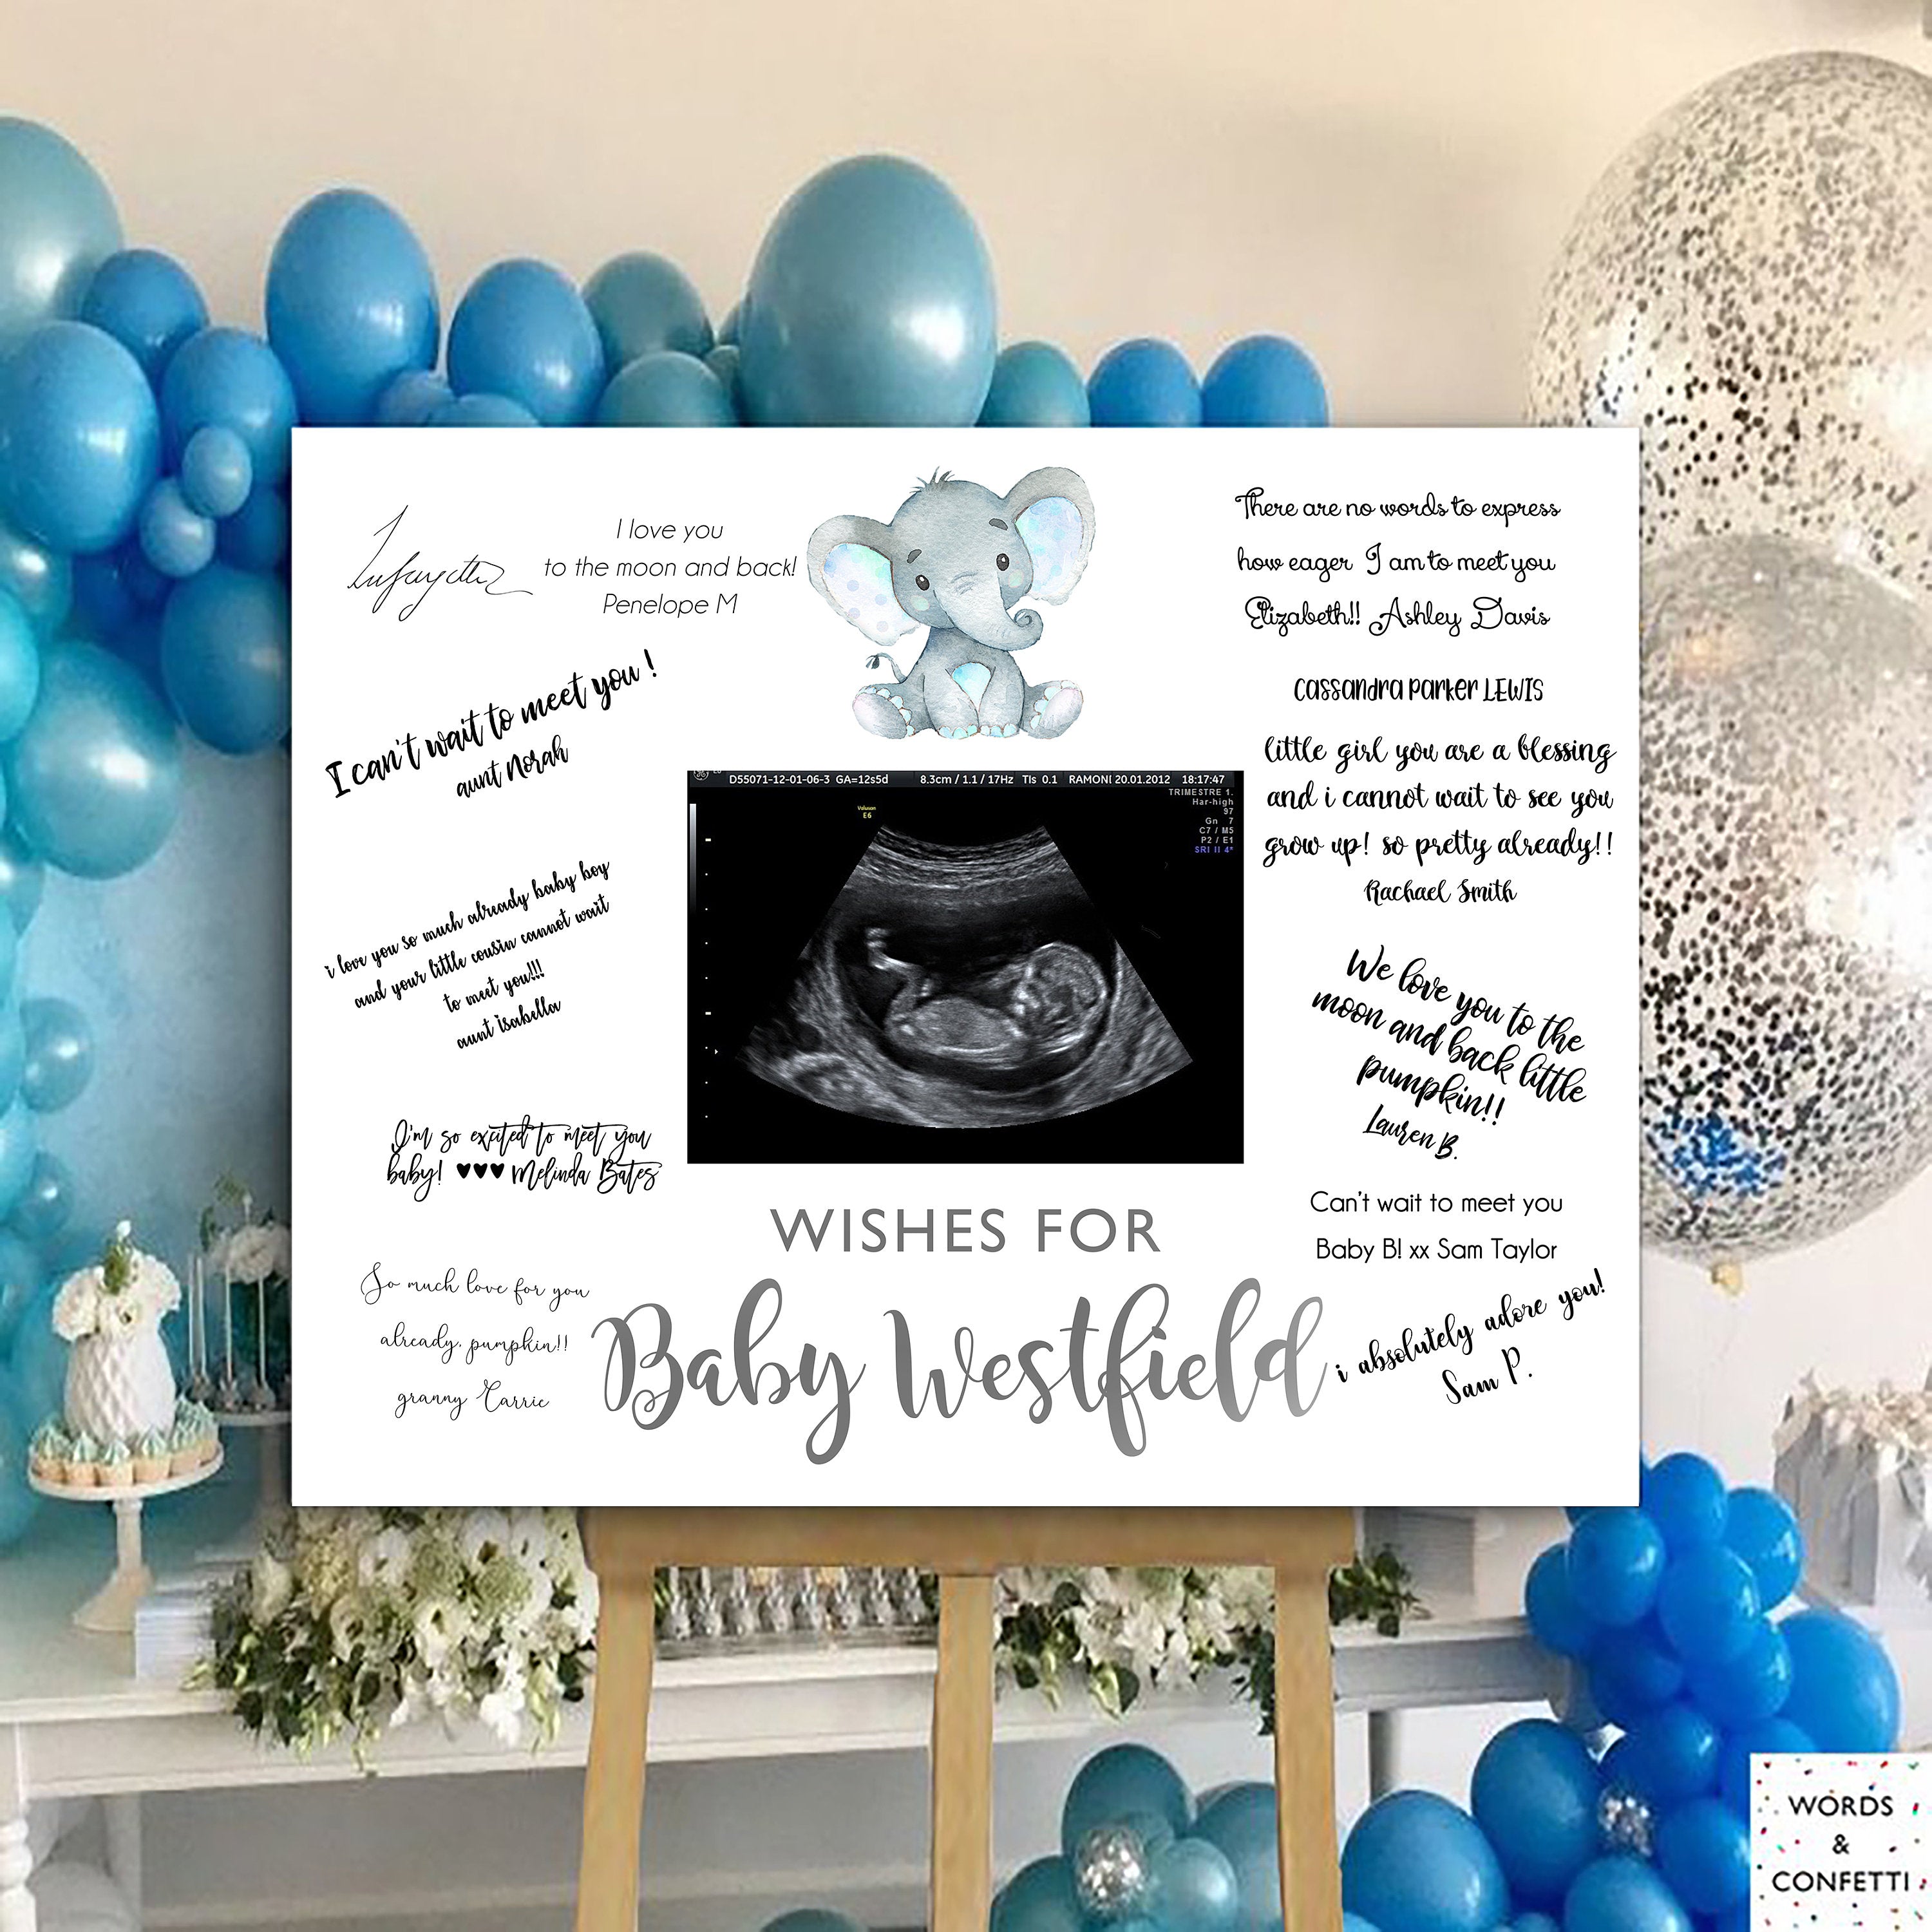 Guest book for baby shower guest book (Hardcover): Baby shower guest book,  celebrations decor, memory book, baby shower guest book, celebration  message log book, celebration guestbook, celebration par 